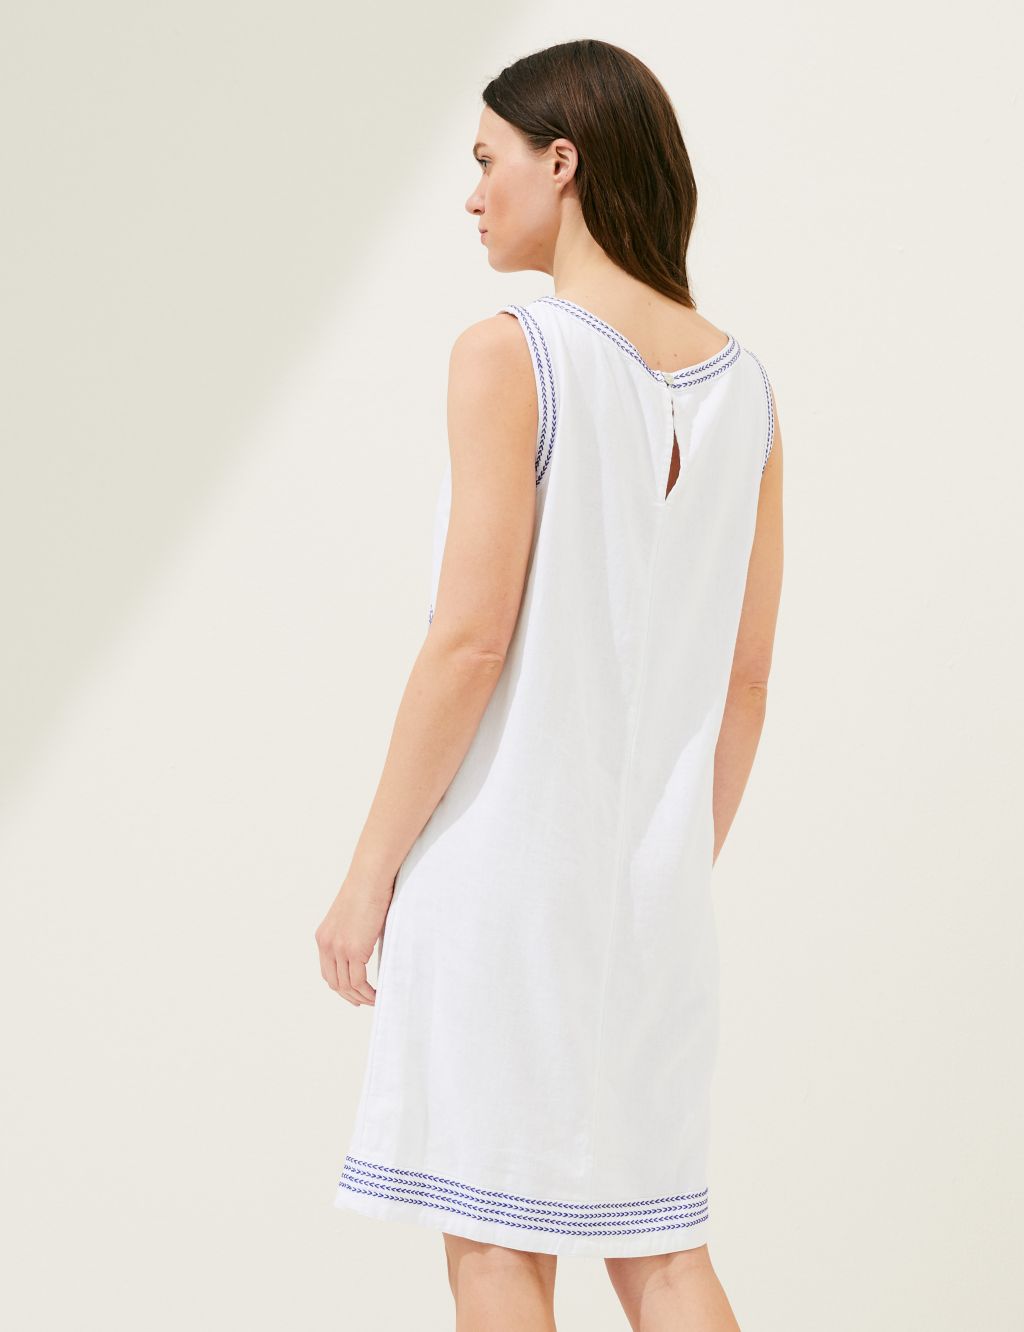 Linen Rich Embroidered Shift Dress image 4